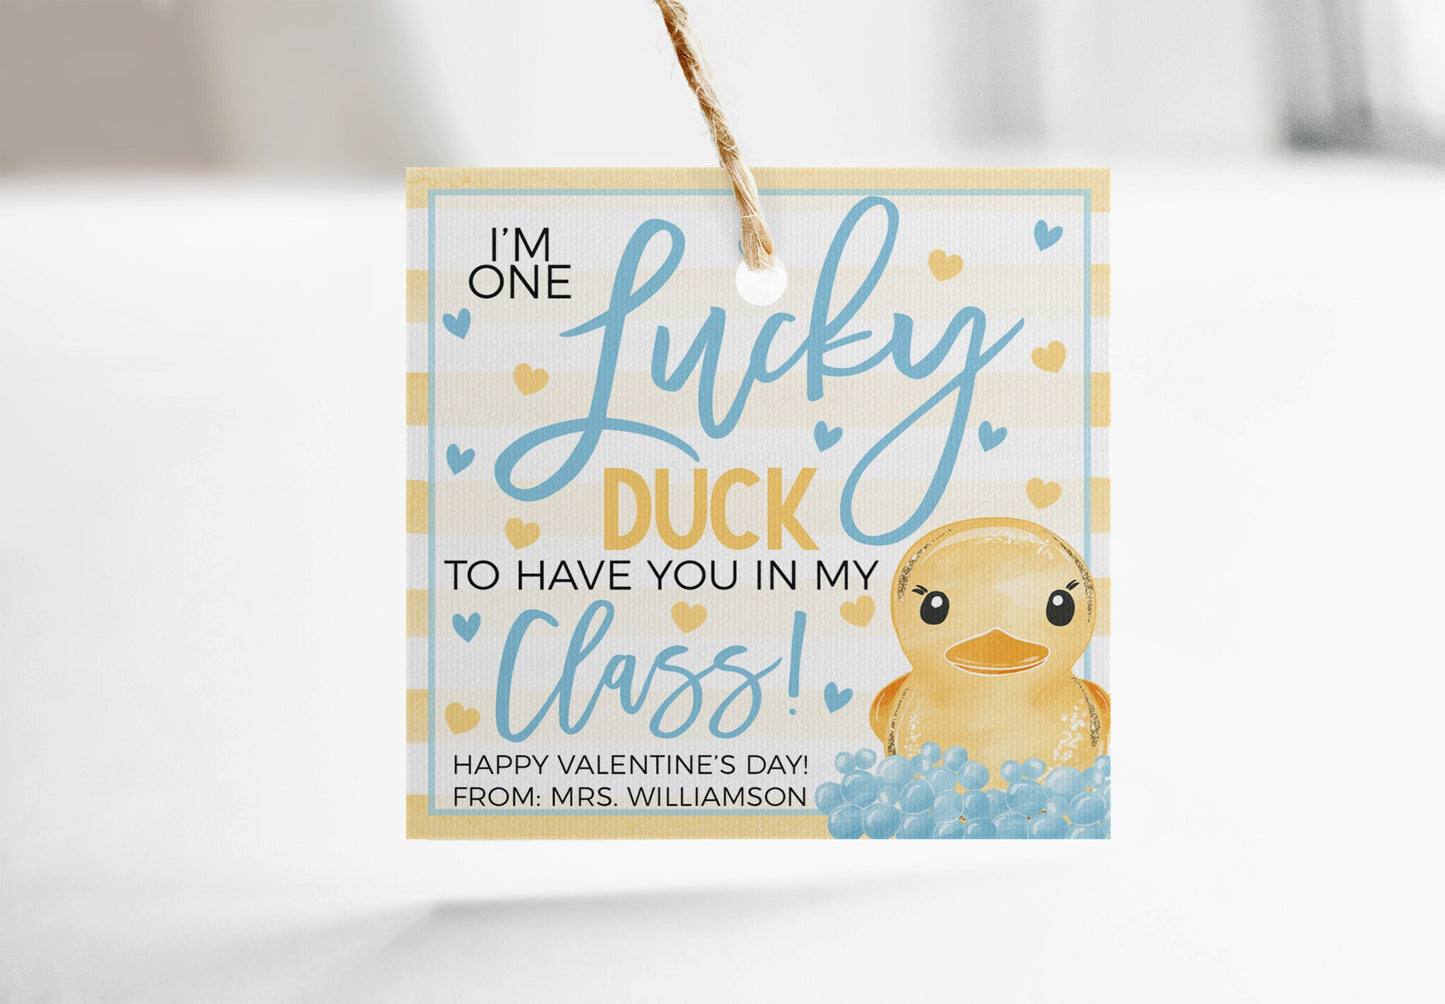 Valentine Rubber Duck Gift Tags, Lucky Duck To Have You In My Class, Valentine's Gift For Students Classroom Classmates Kids Teacher